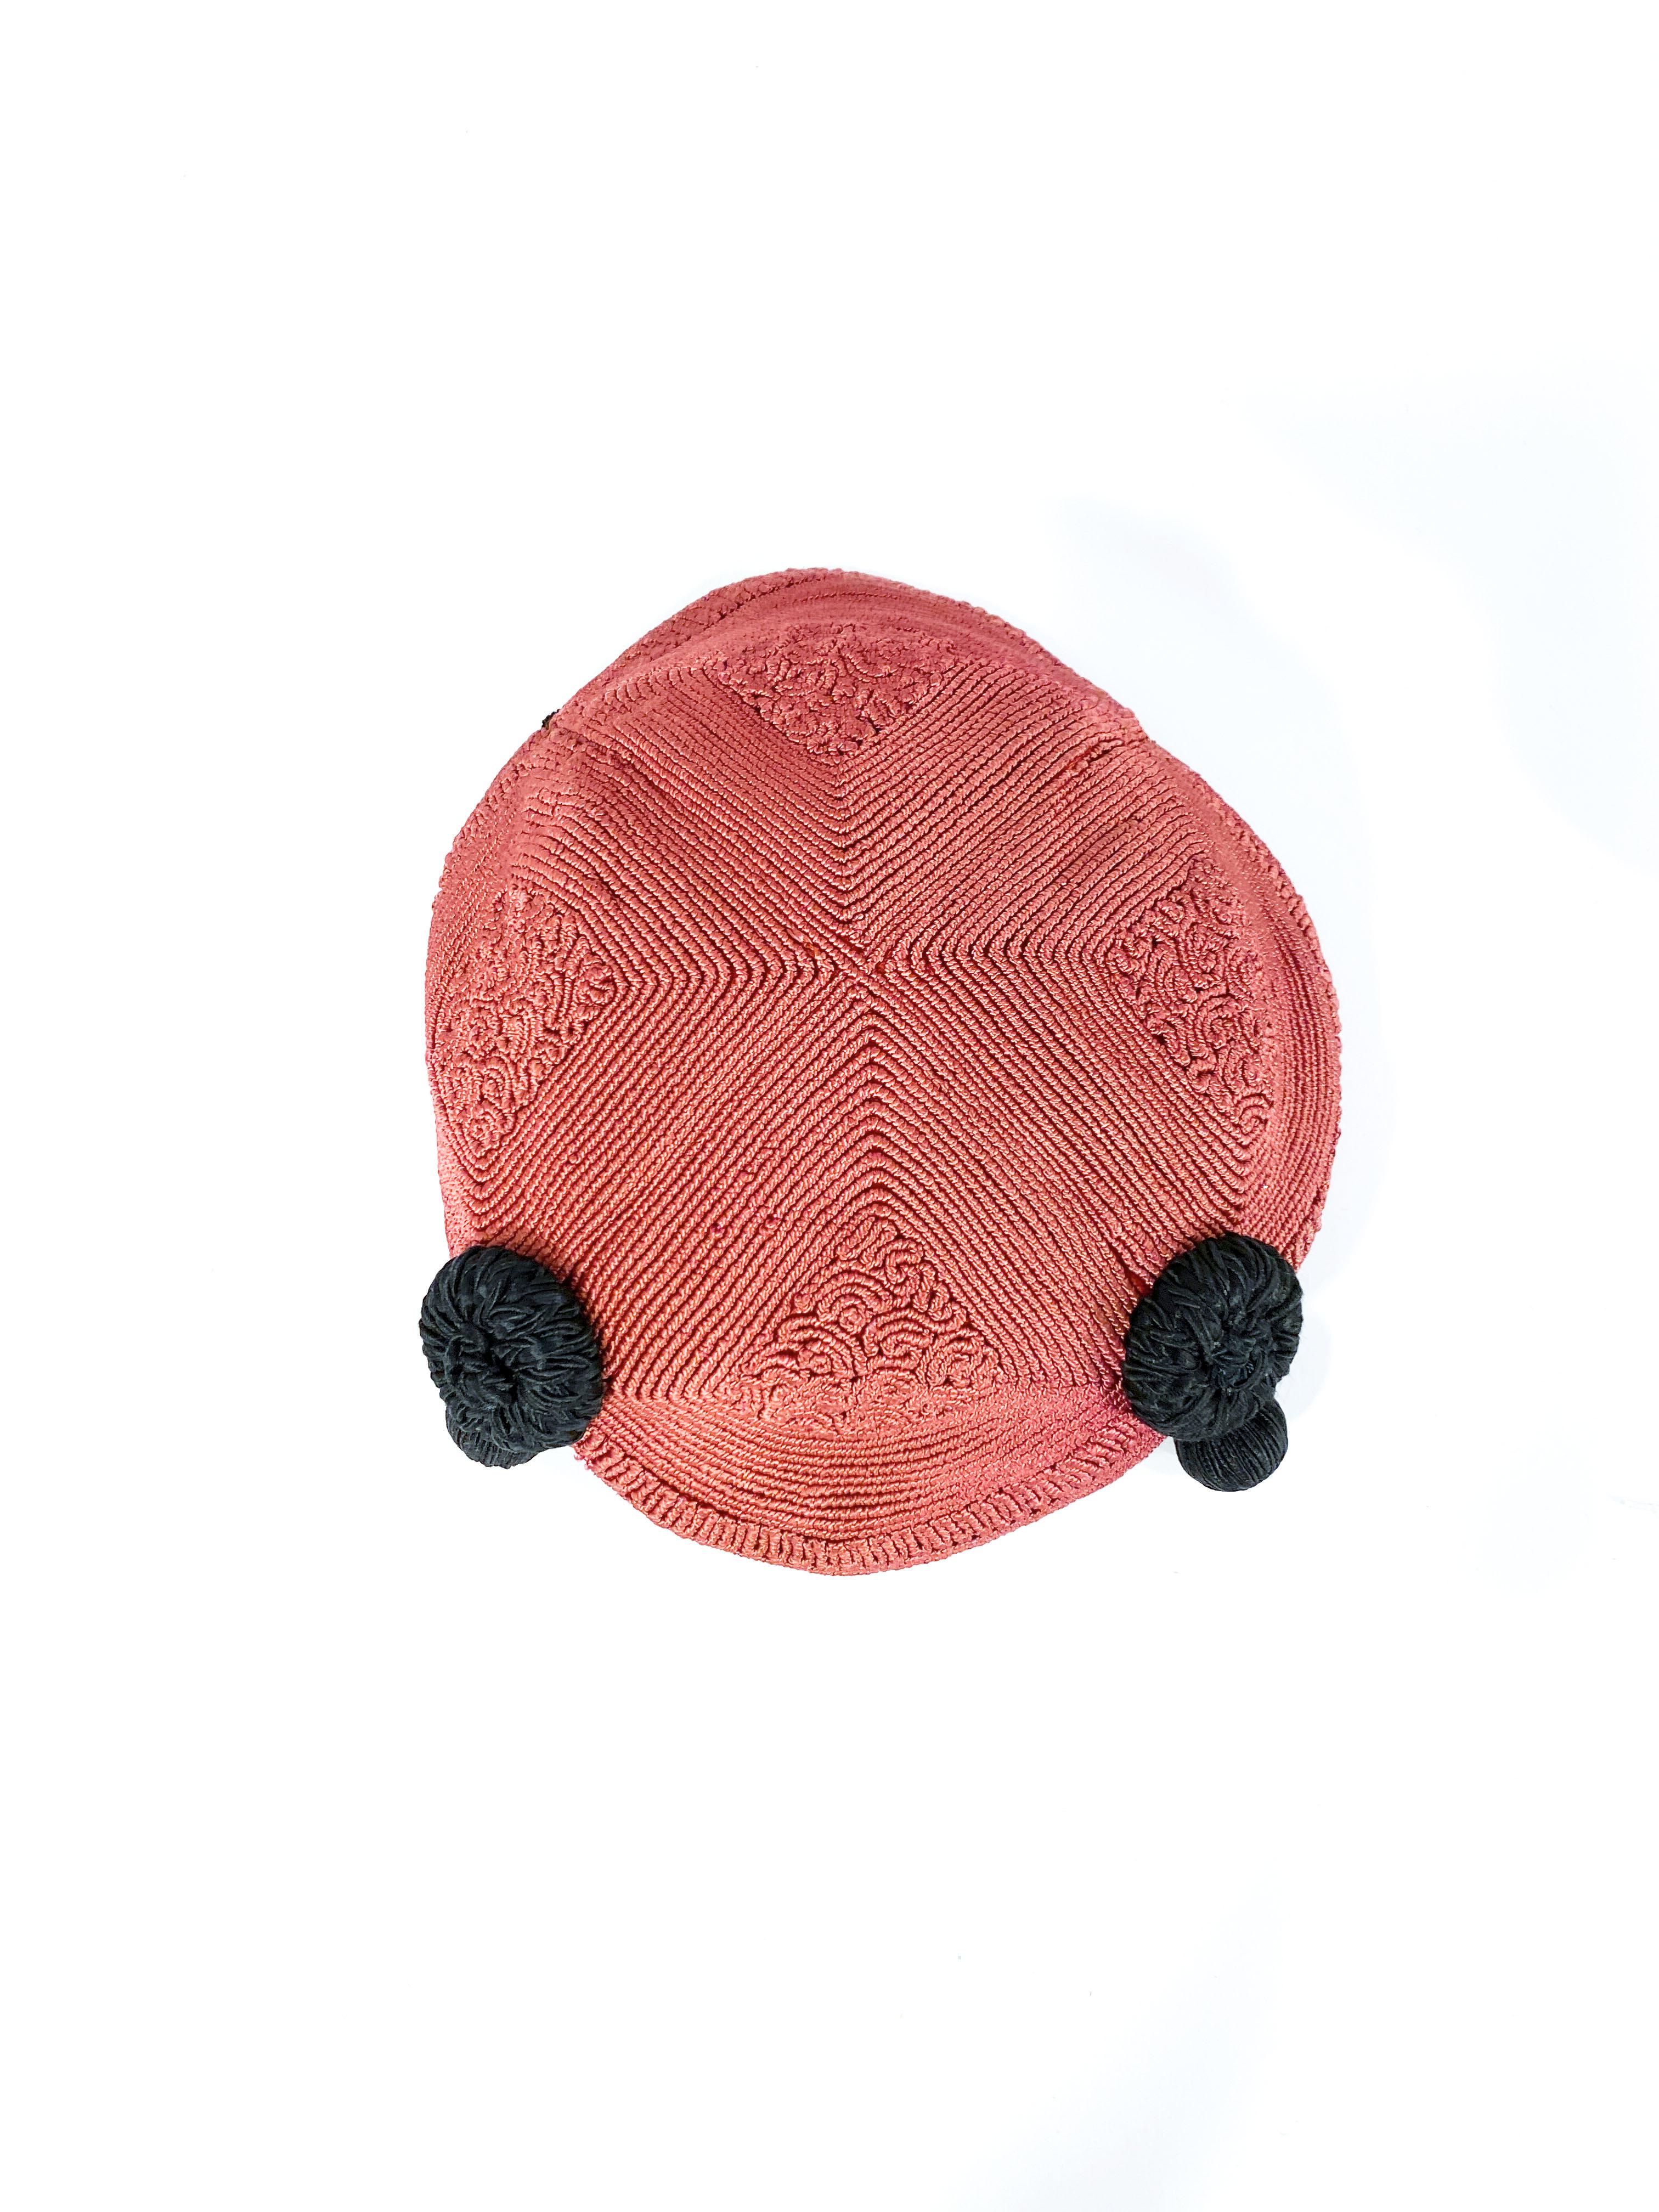 1930s Art Deco Rust Soutache Skull Cap with Black Tassels In Good Condition For Sale In San Francisco, CA